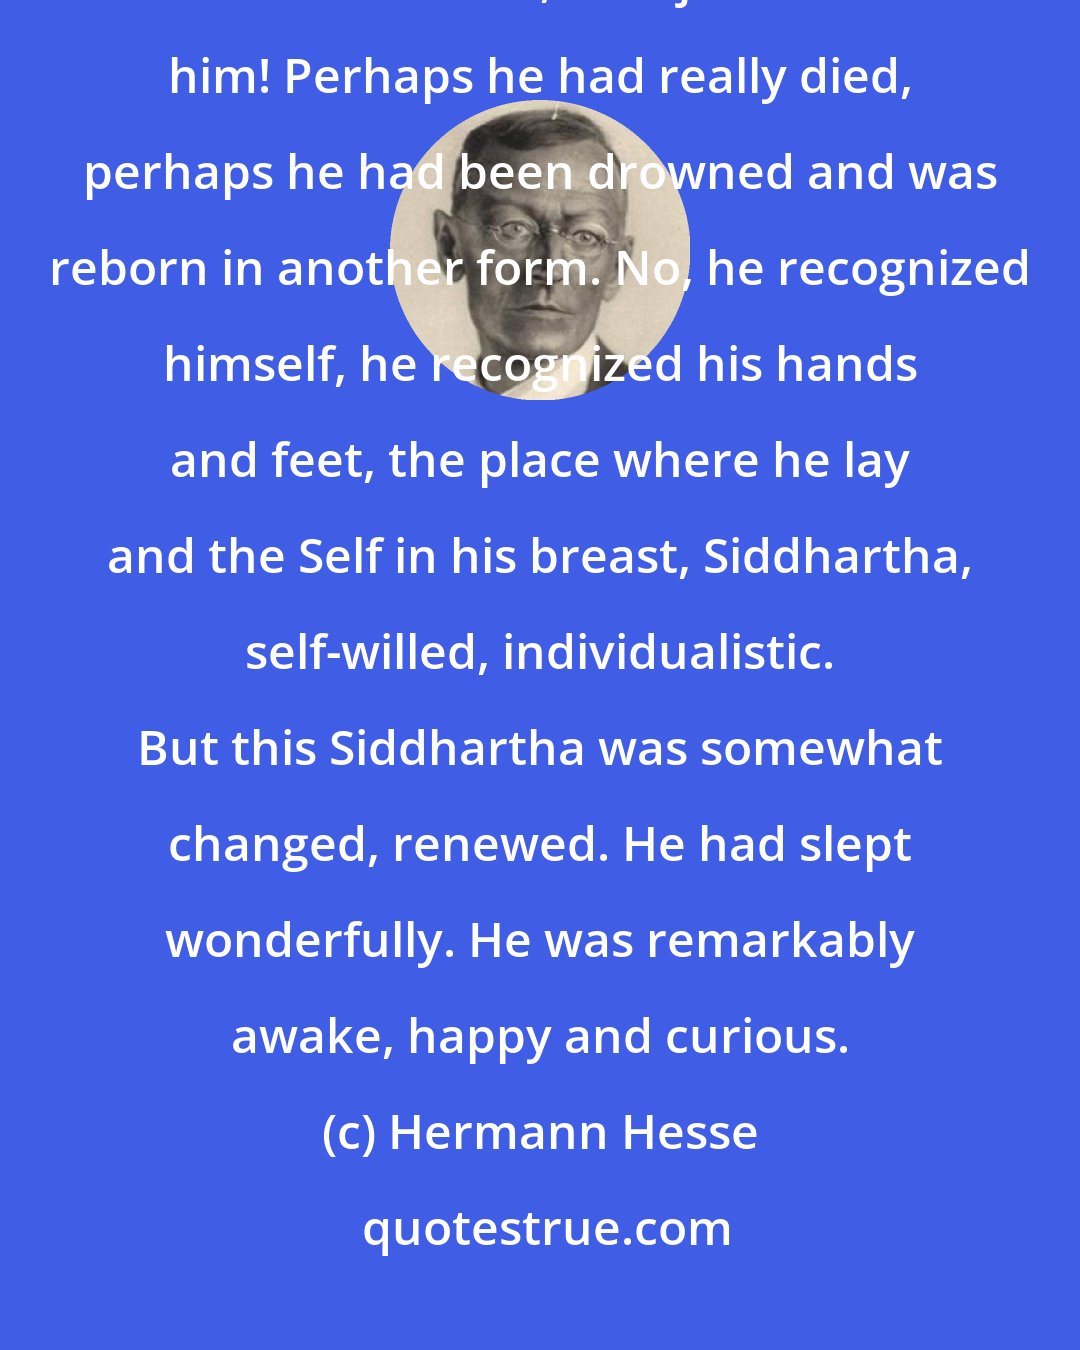 Hermann Hesse: What a wonderful sleep it had been! Never had sleep so refreshed him, so renewed him, so rejuvenated him! Perhaps he had really died, perhaps he had been drowned and was reborn in another form. No, he recognized himself, he recognized his hands and feet, the place where he lay and the Self in his breast, Siddhartha, self-willed, individualistic. But this Siddhartha was somewhat changed, renewed. He had slept wonderfully. He was remarkably awake, happy and curious.